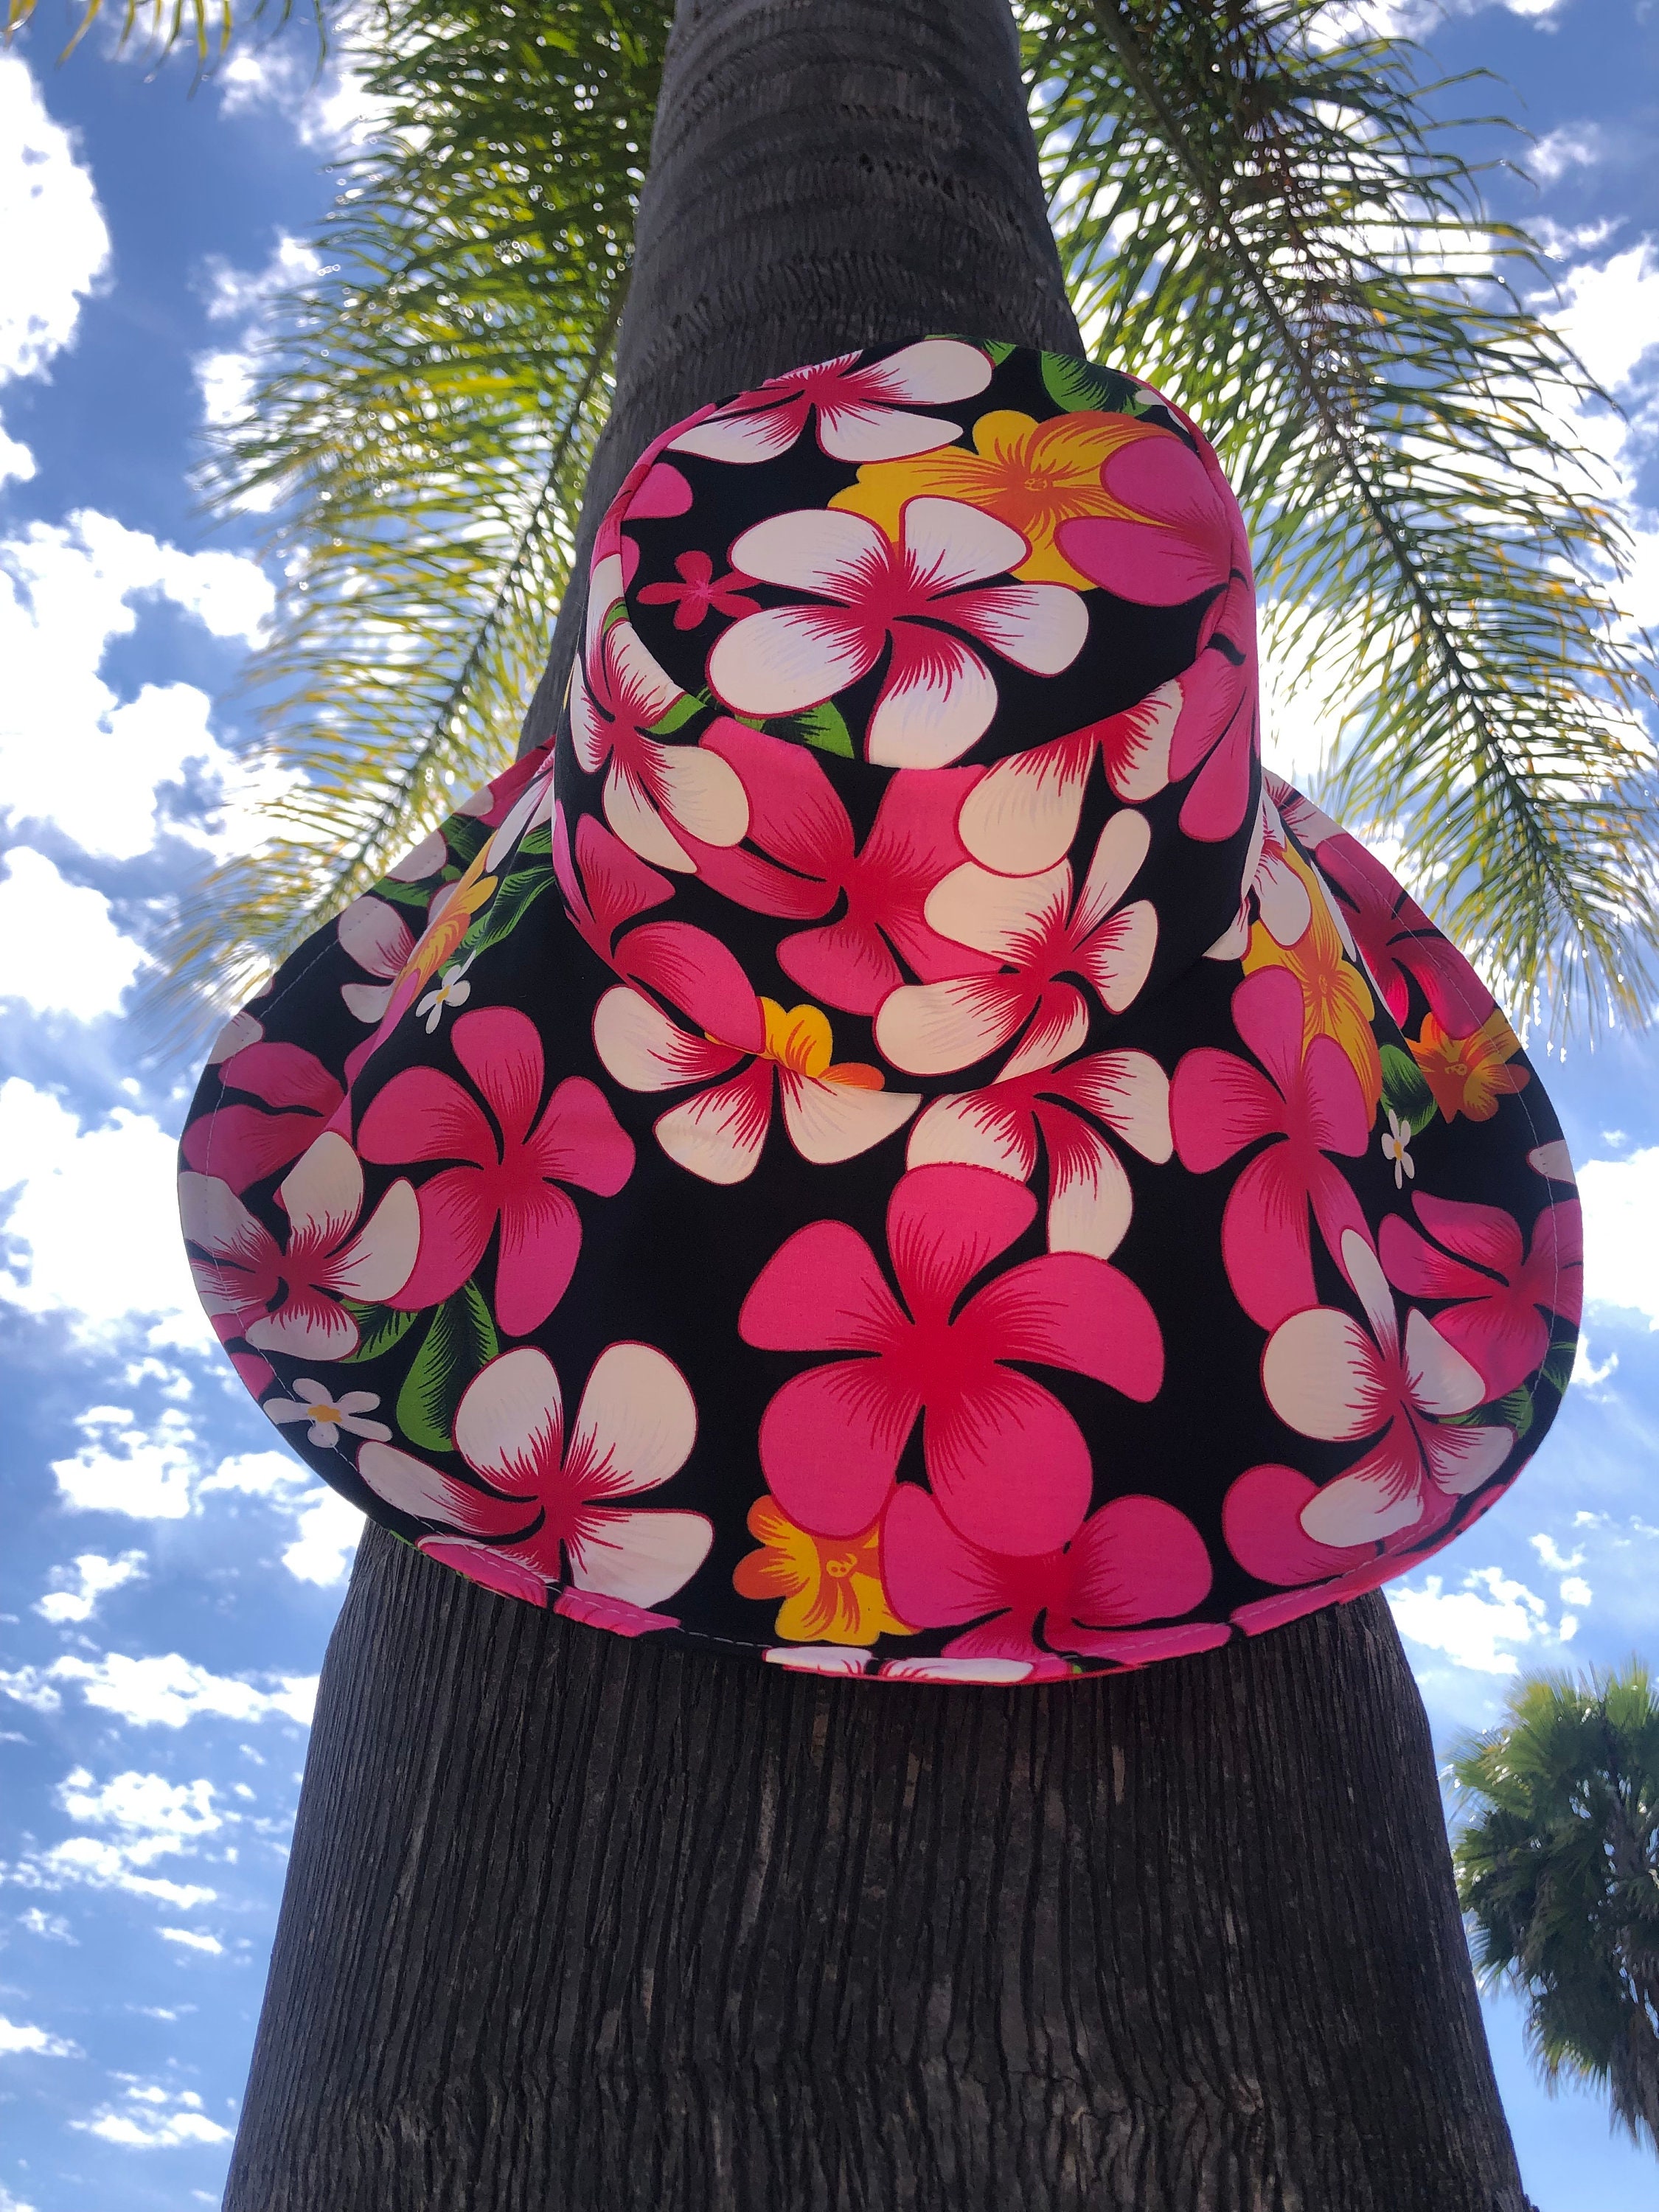 Fun and Colorful Wide Brim Sunhat in Pink and Black, Floral 70s Look Hat  Womens, Foldable and Packable Freckles California